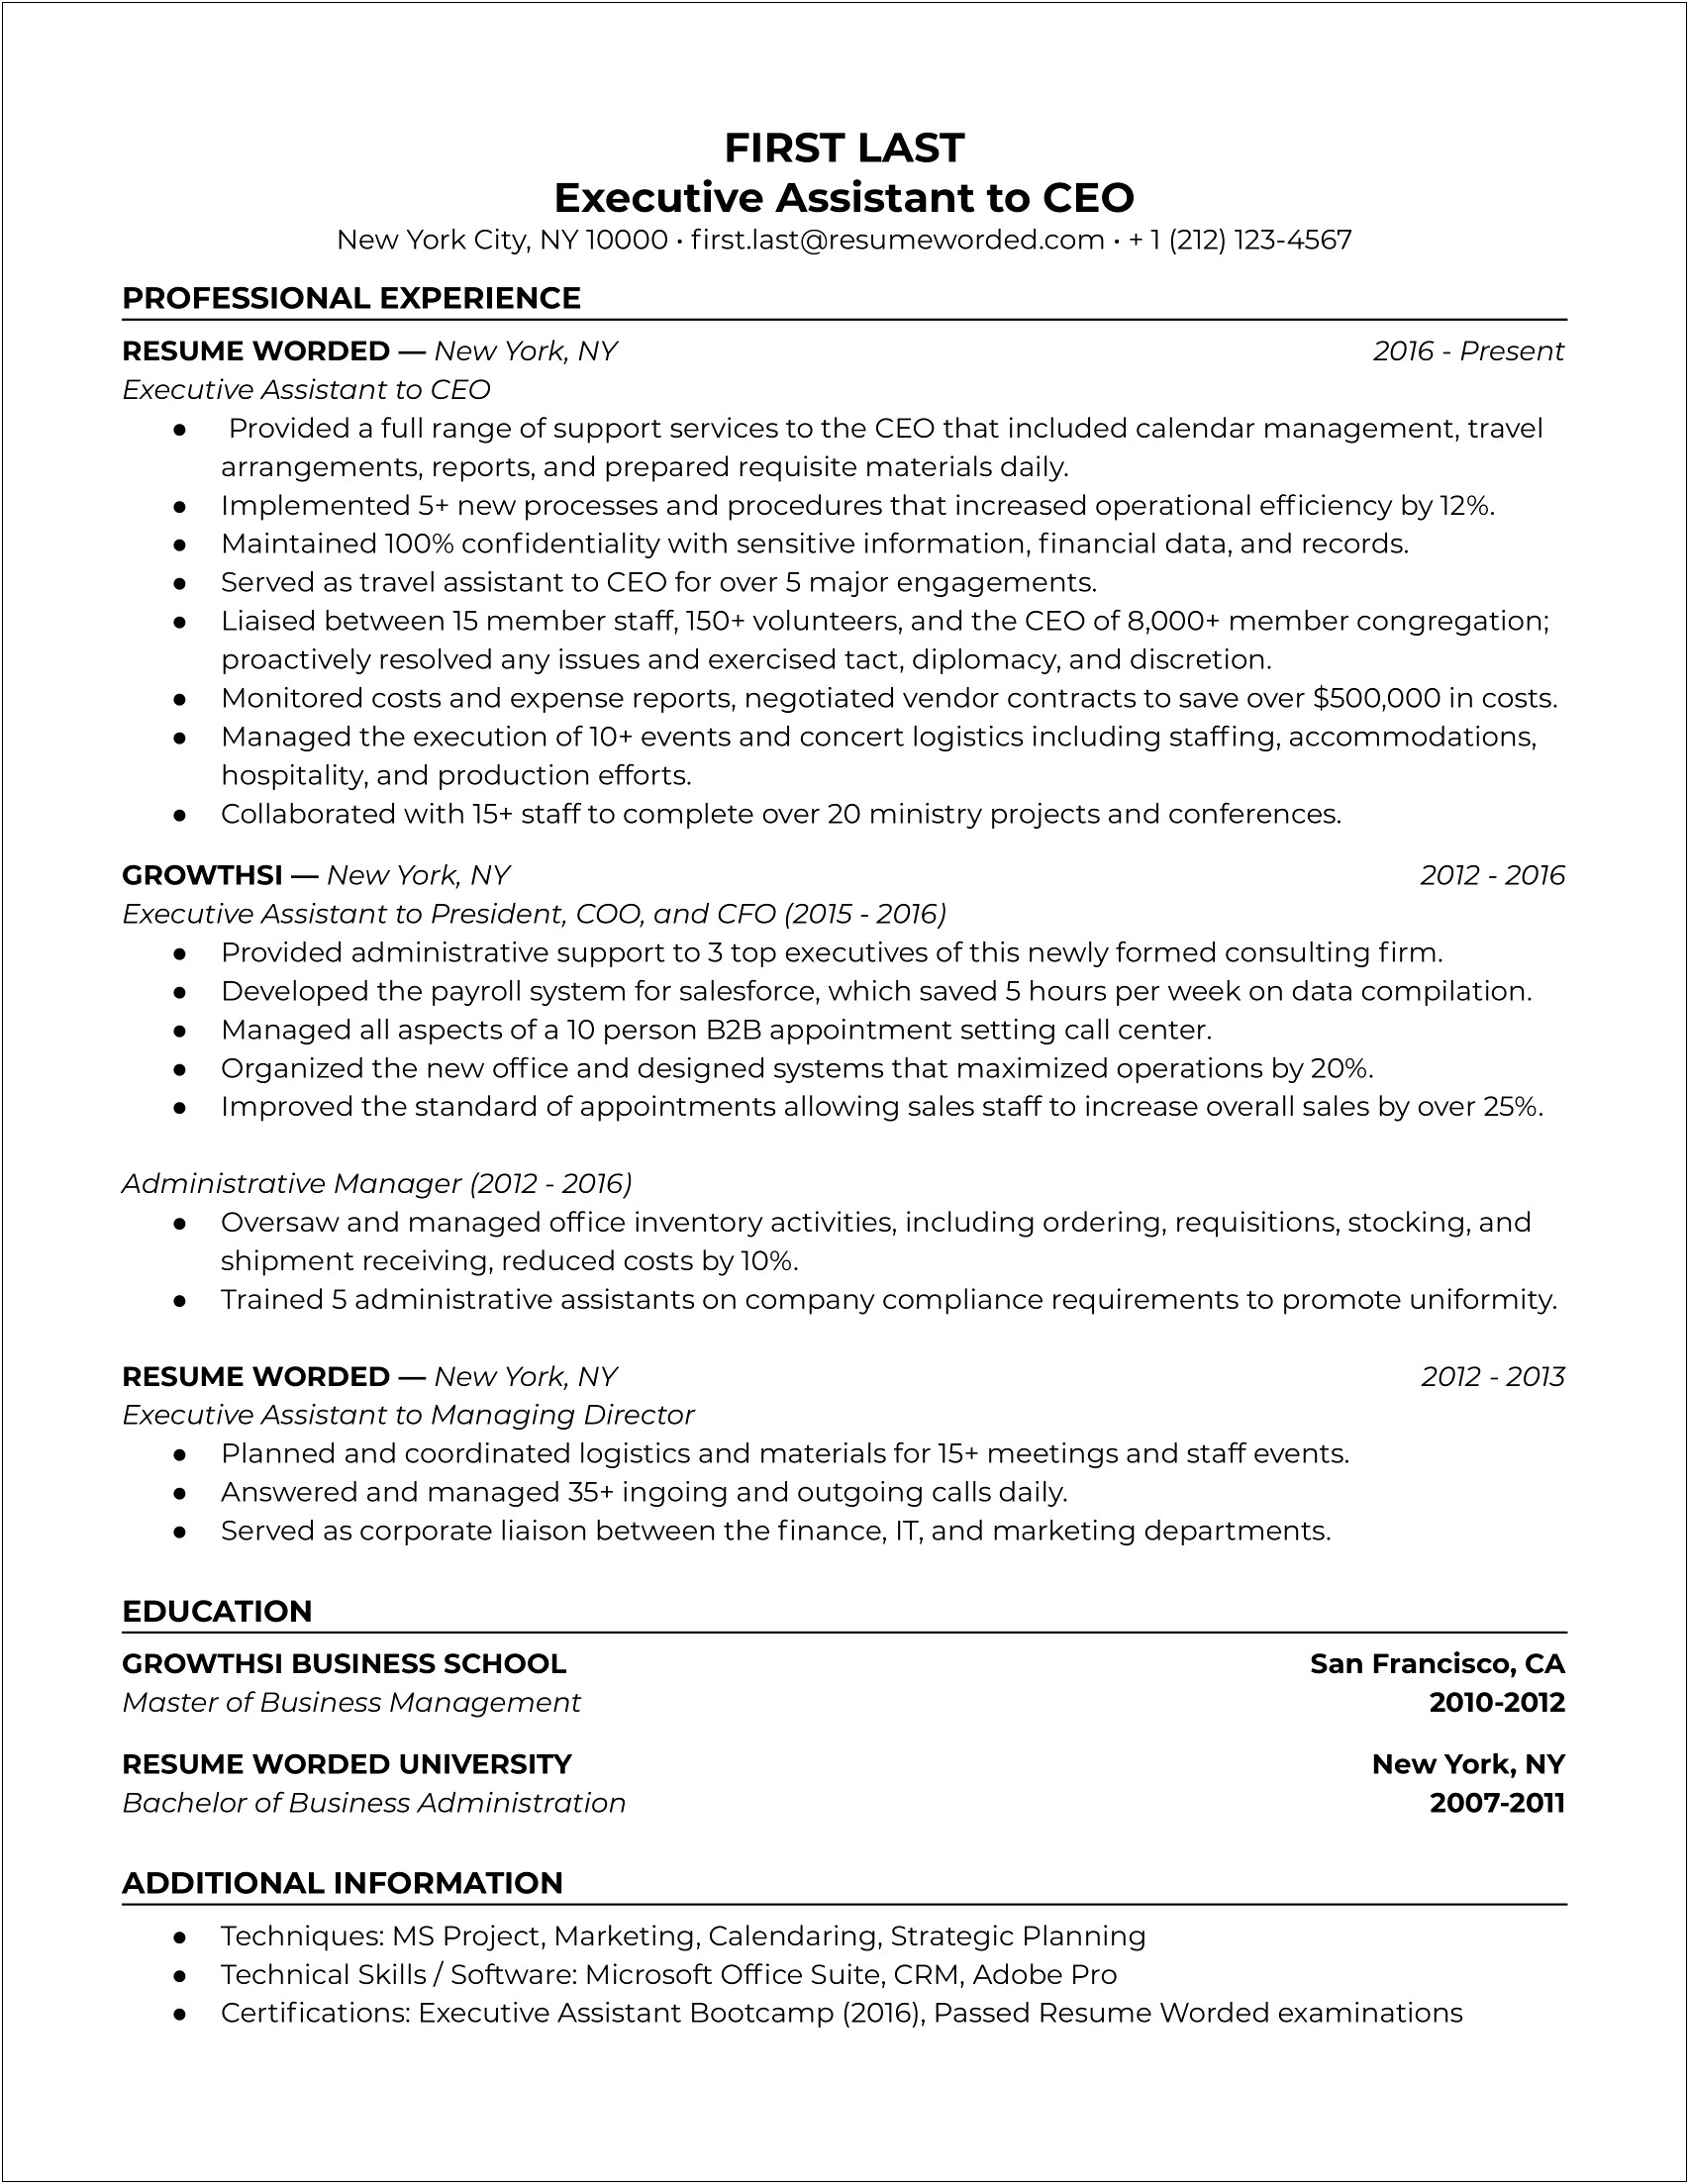 Resume Summary Statement For Executive Administrative Assistant.pdf